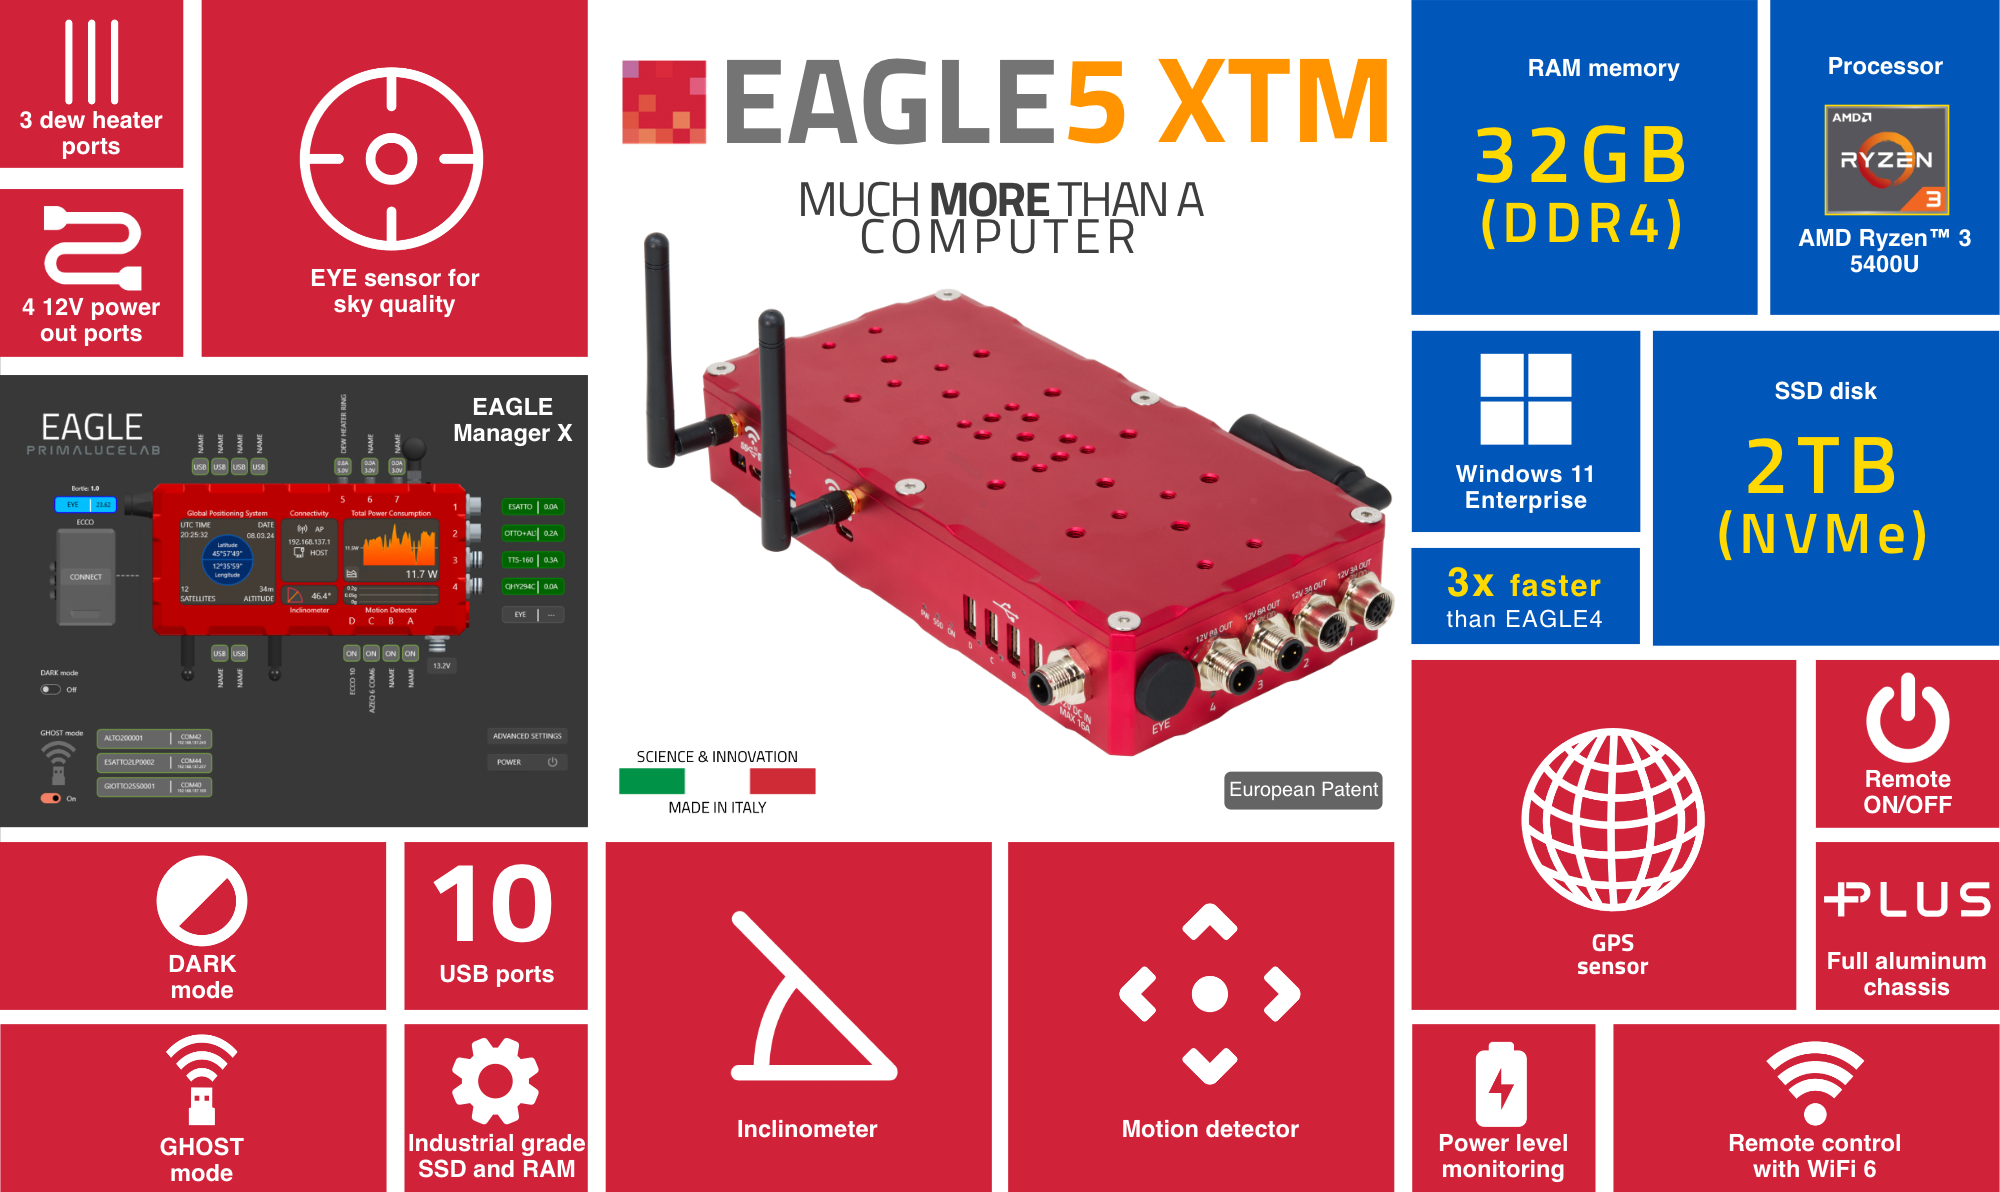 EAGLE5 XTM computer for telescopes and astrophotography